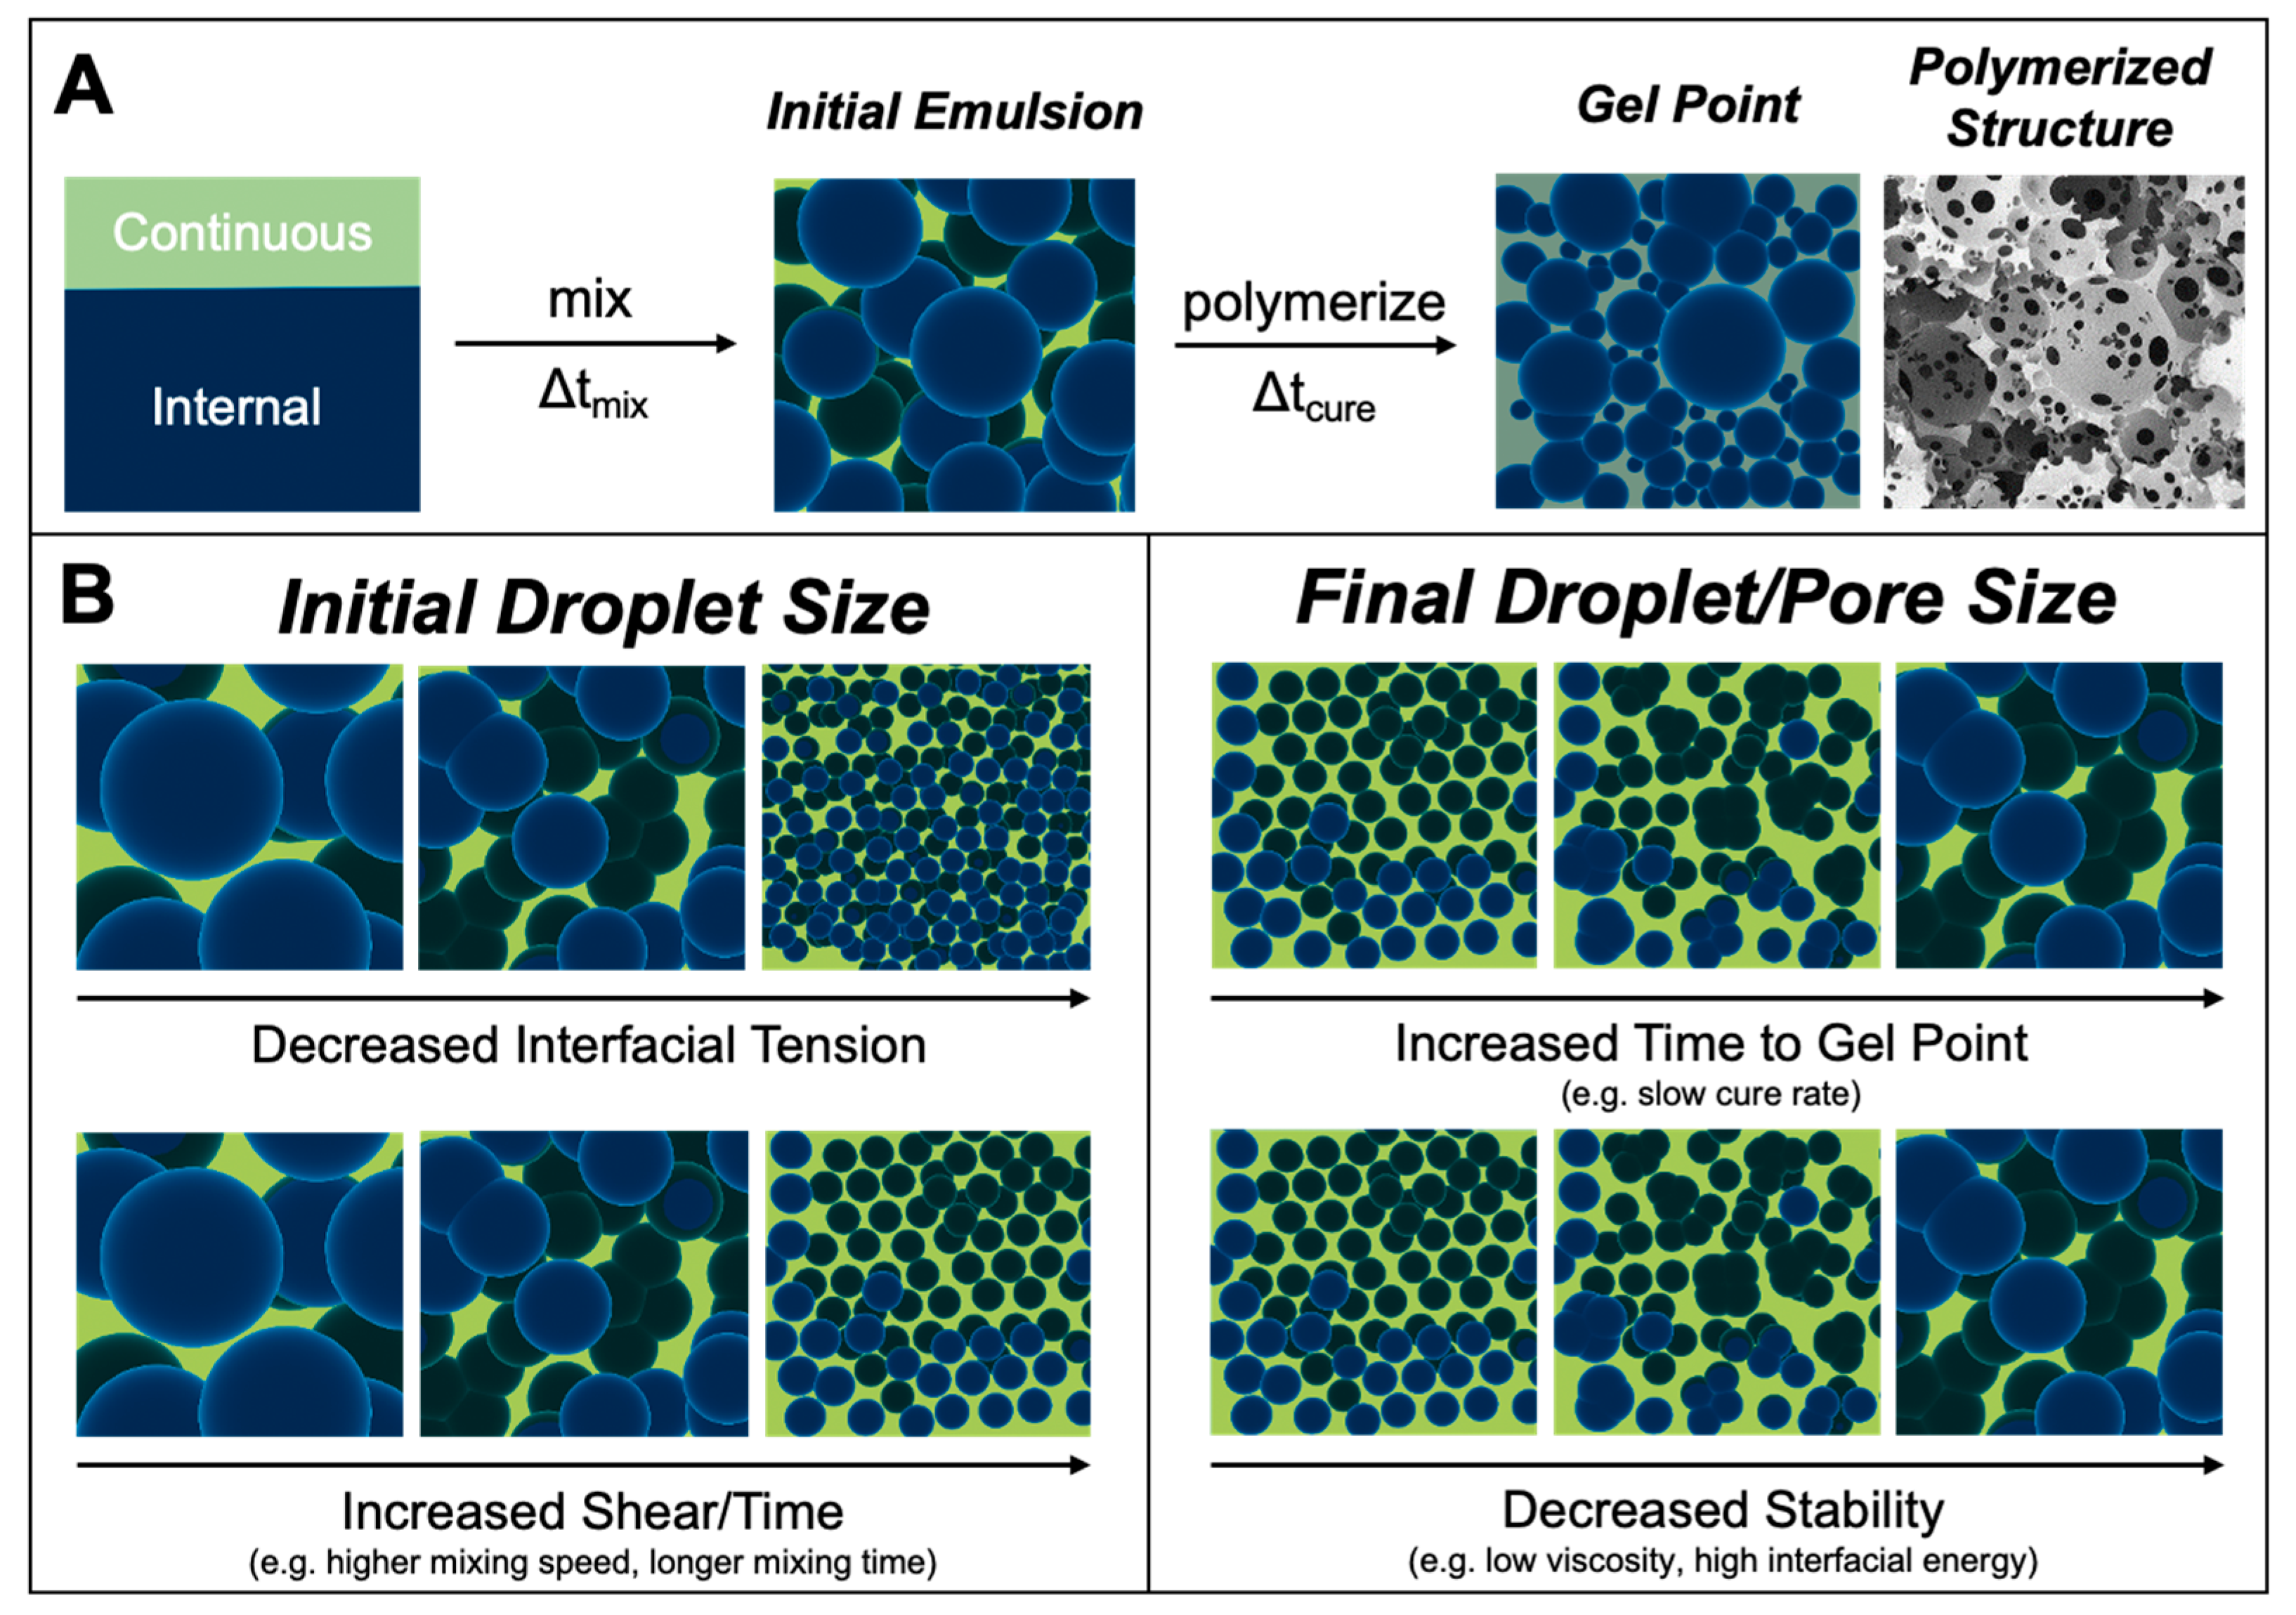 Emulsion Templating: Porous Polymers and Beyond